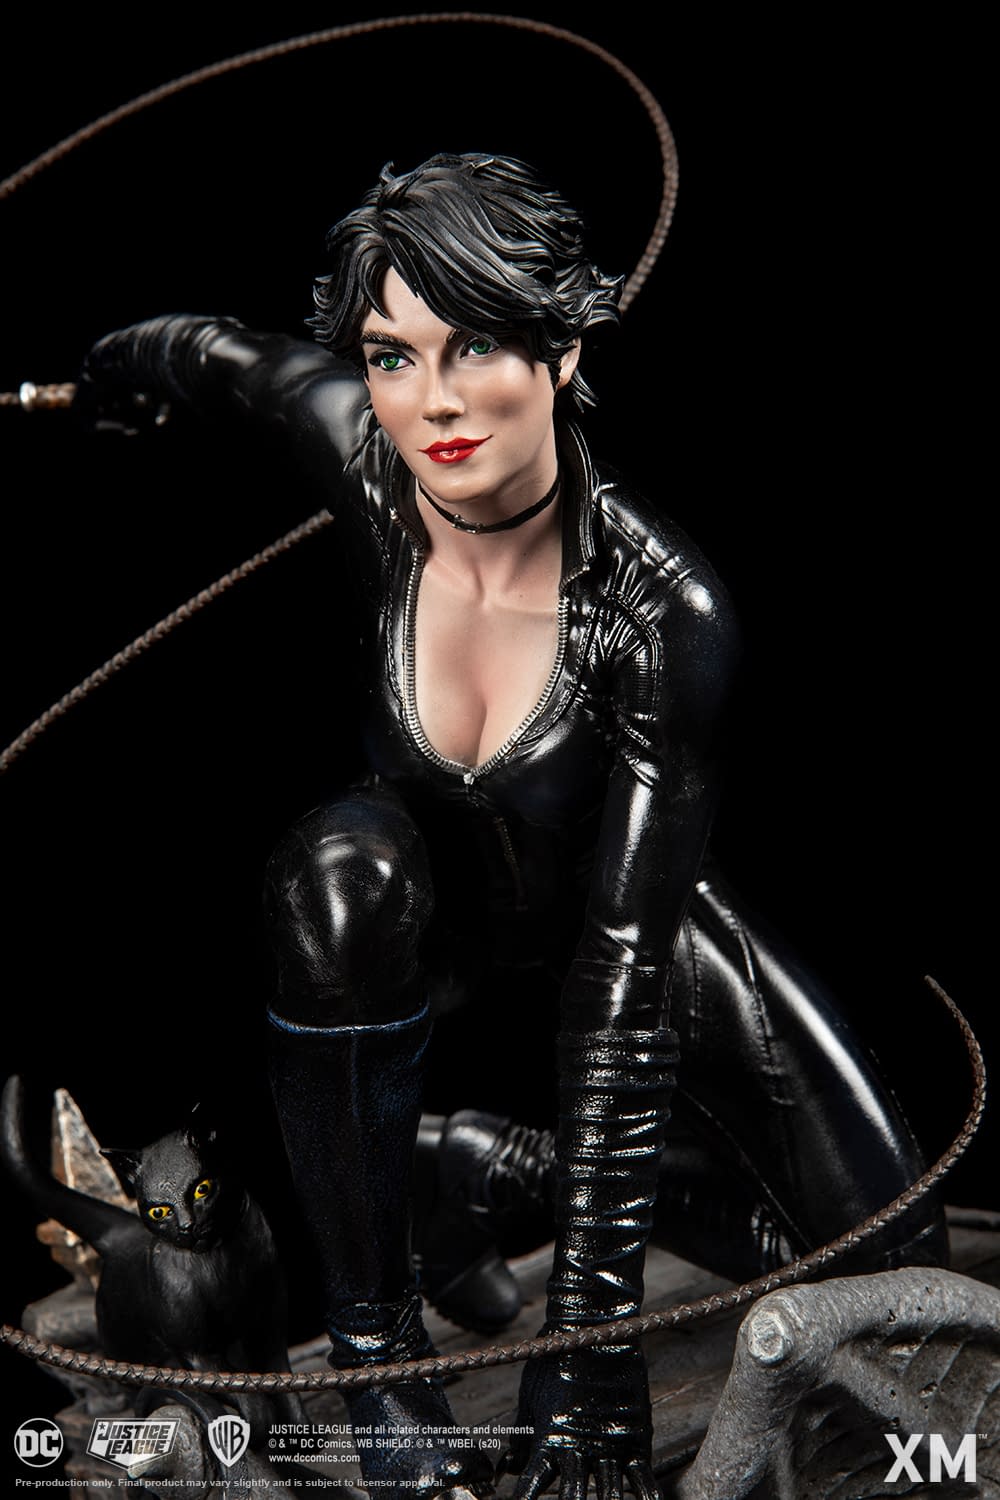 DC Premium Collectibles DC Rebirth Series Catwoman Statue from XM Studios